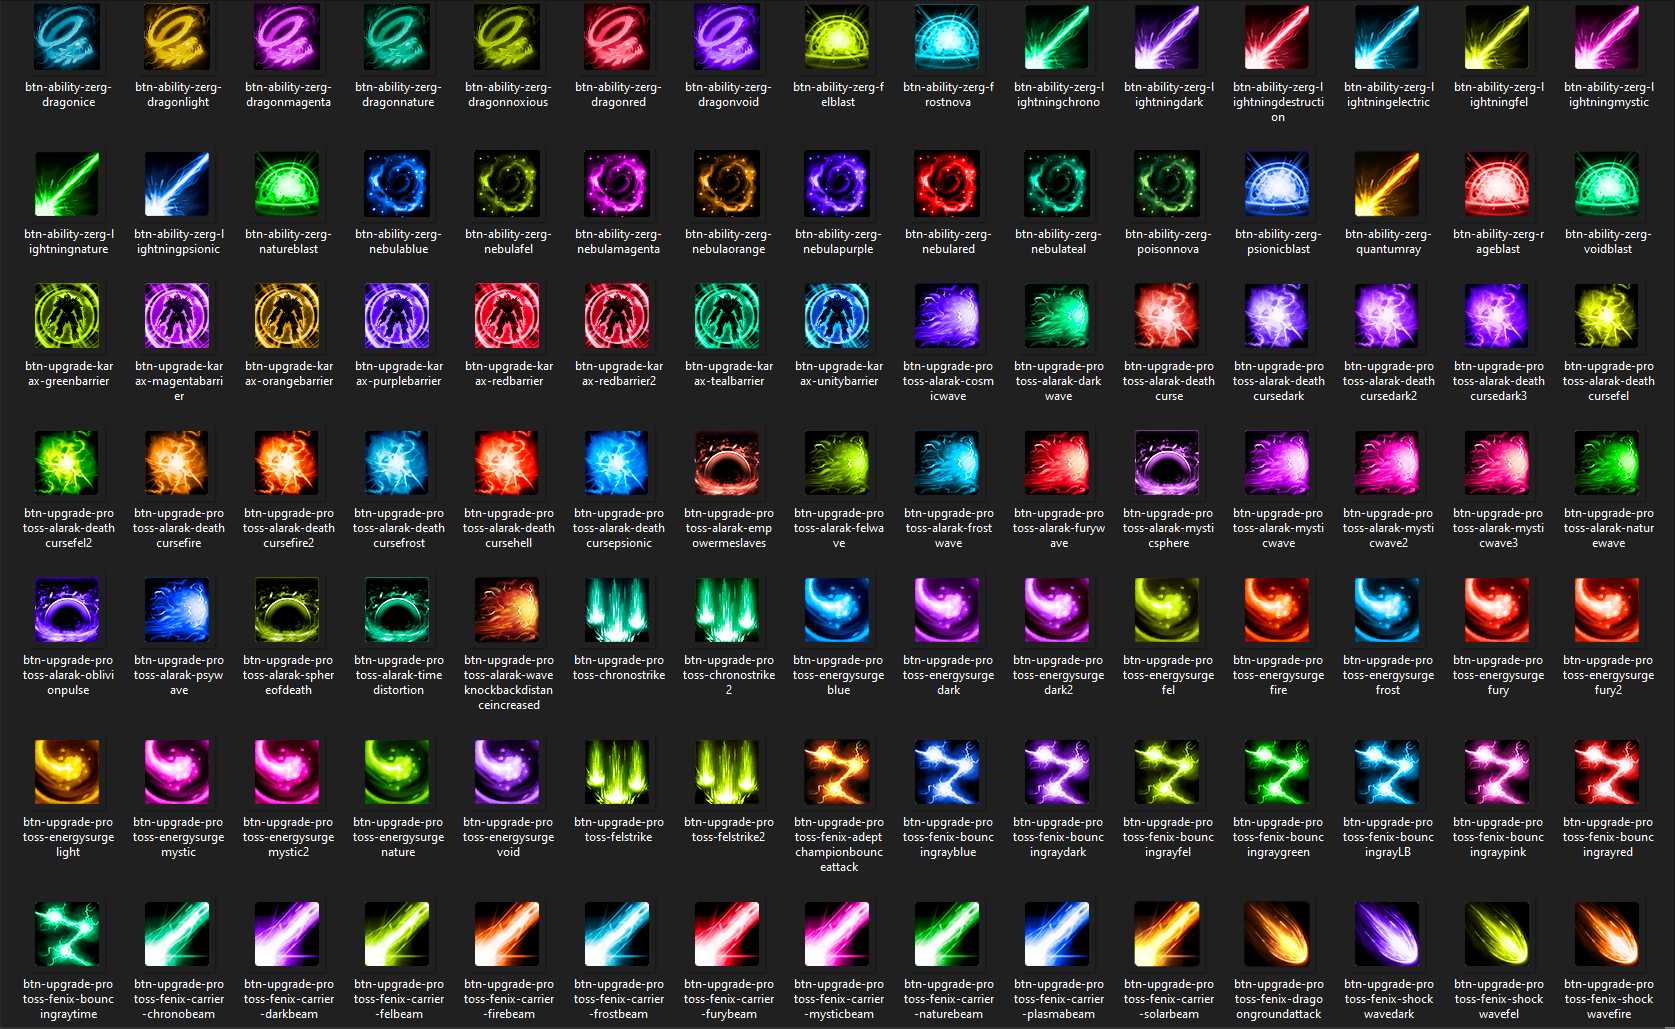 Images - Starcraft 2 Icon Megapack - Assets - Projects - SC2Mapster